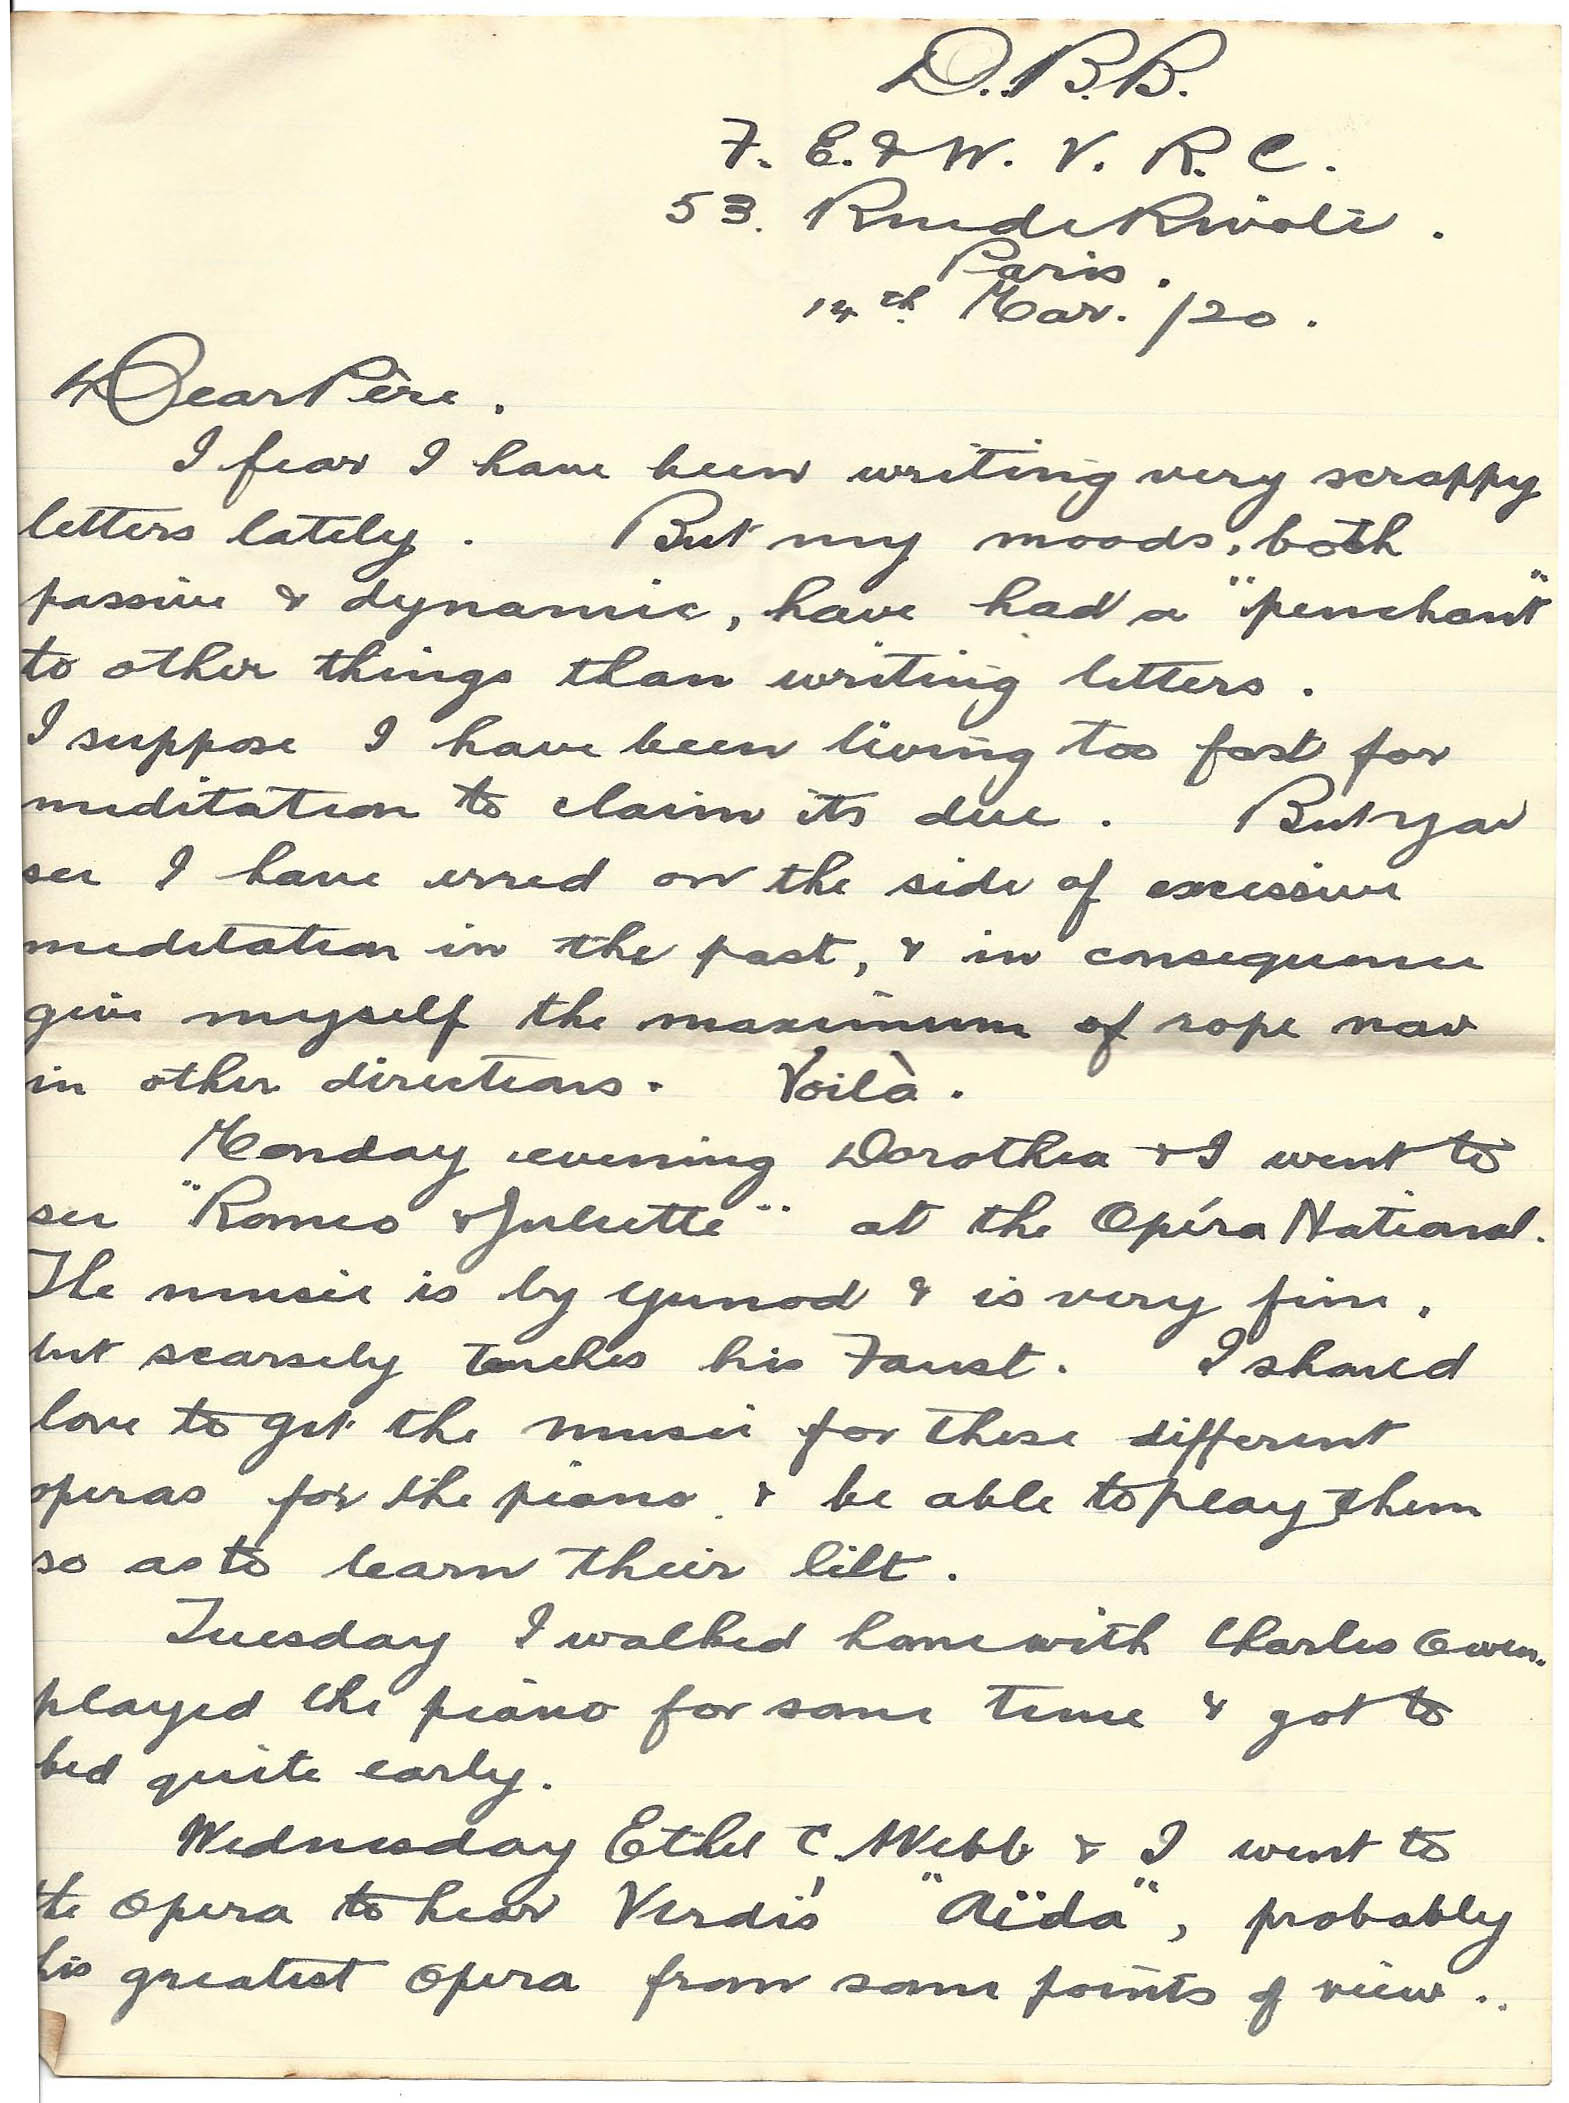 1920-03-14 p1 Donald Bearman letter to his father